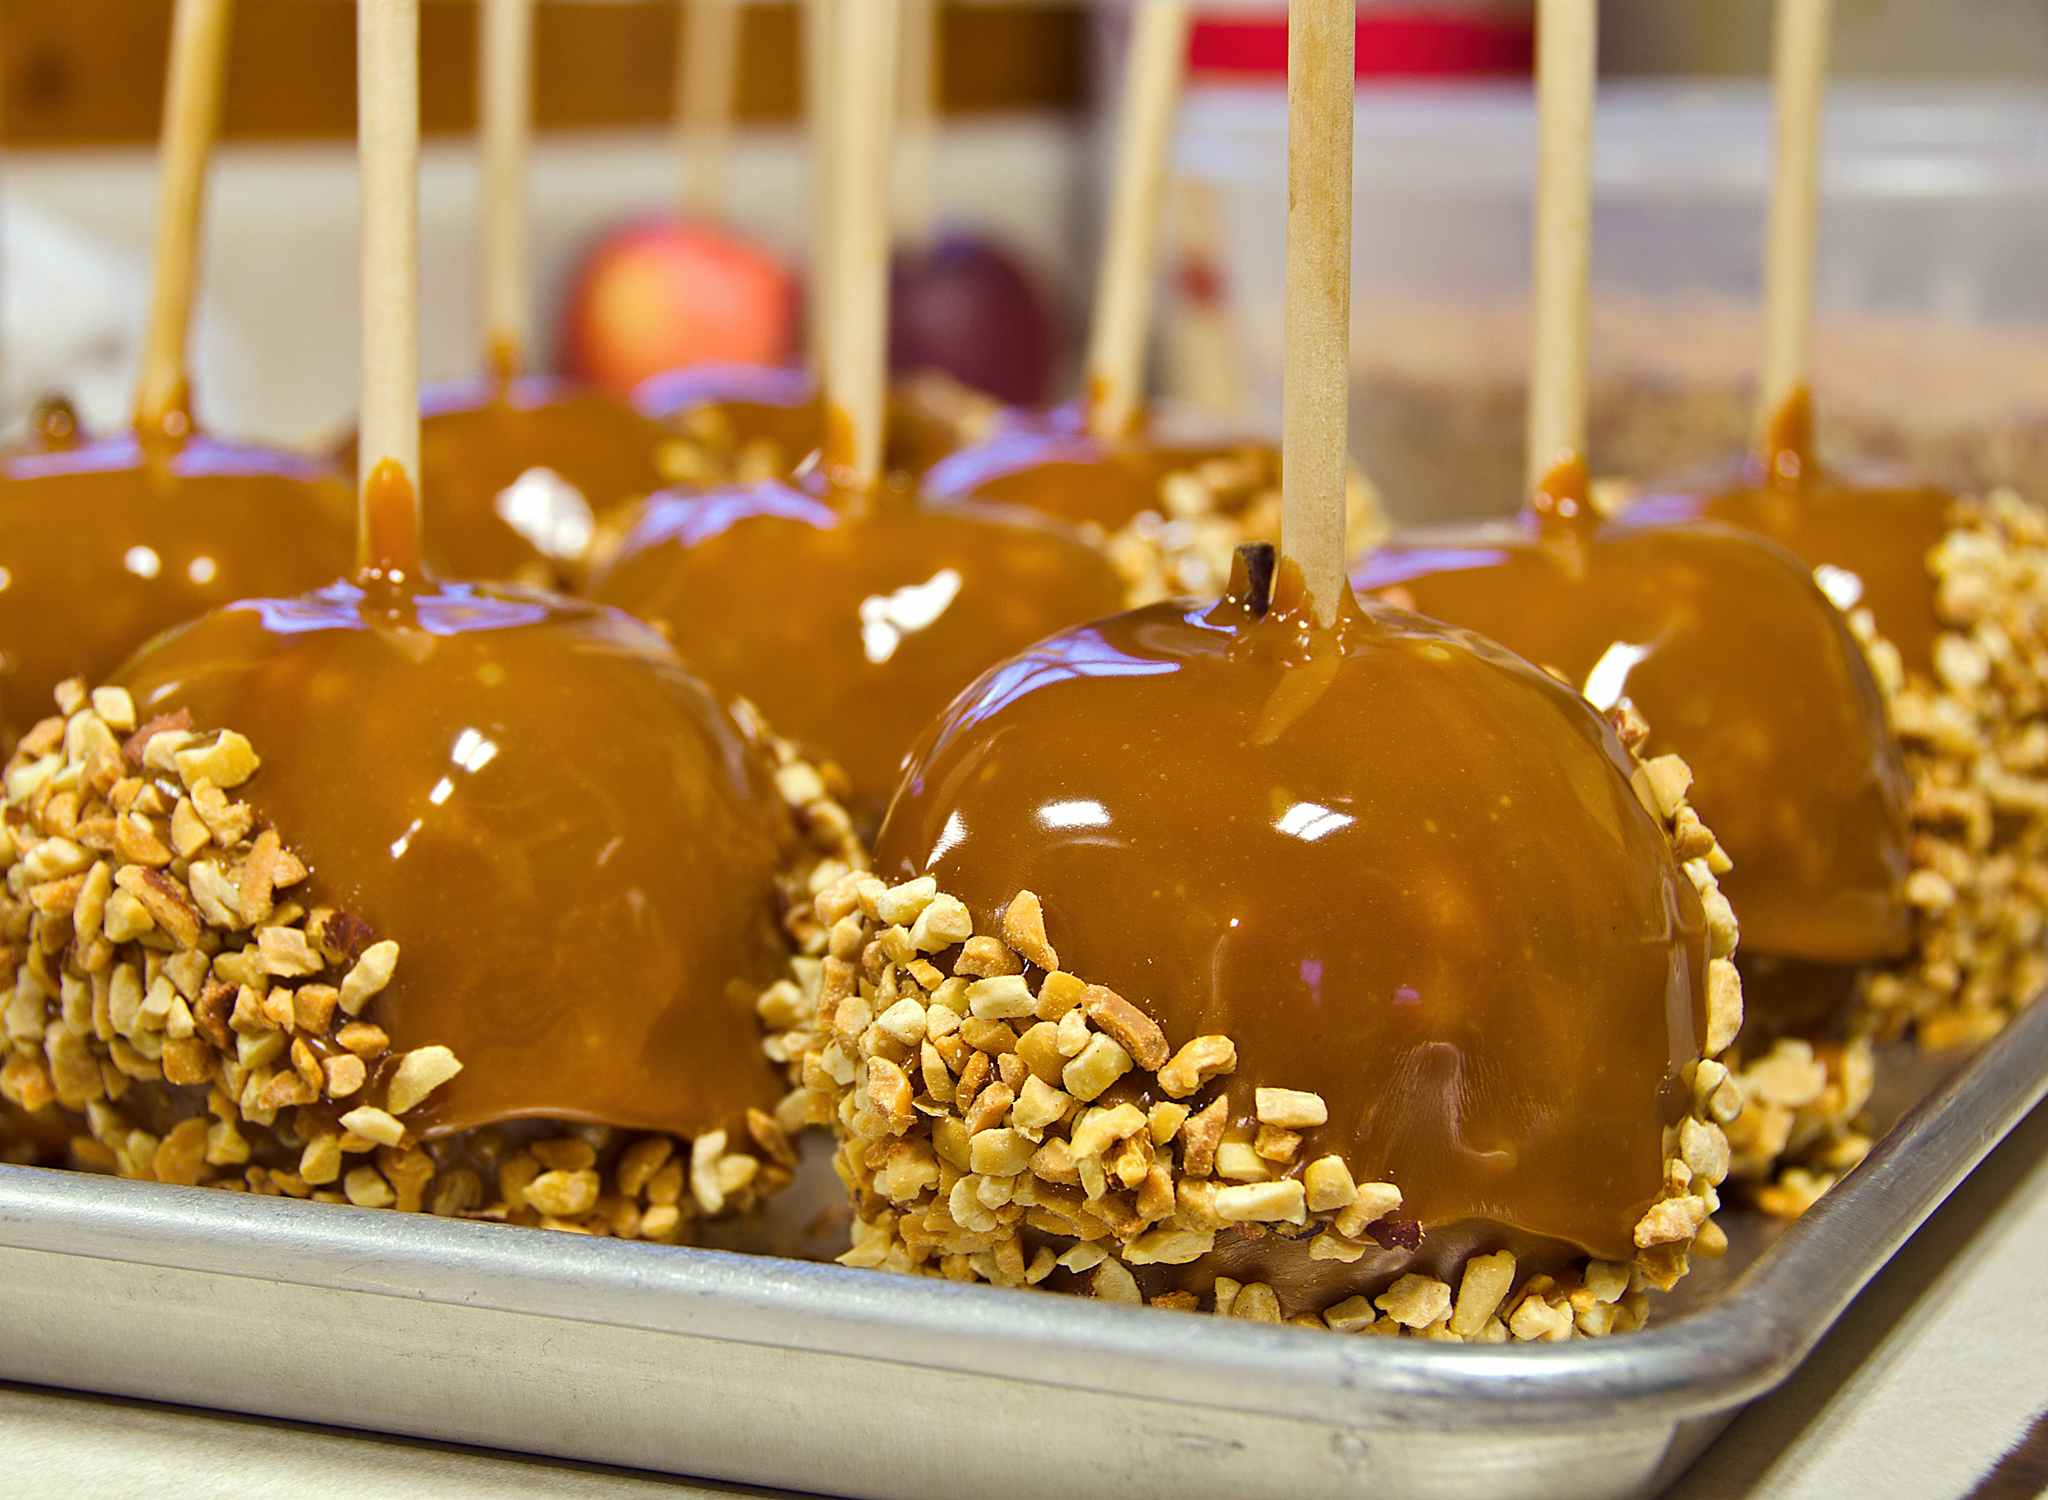 caramel apples dipped in nuts on baking sheet